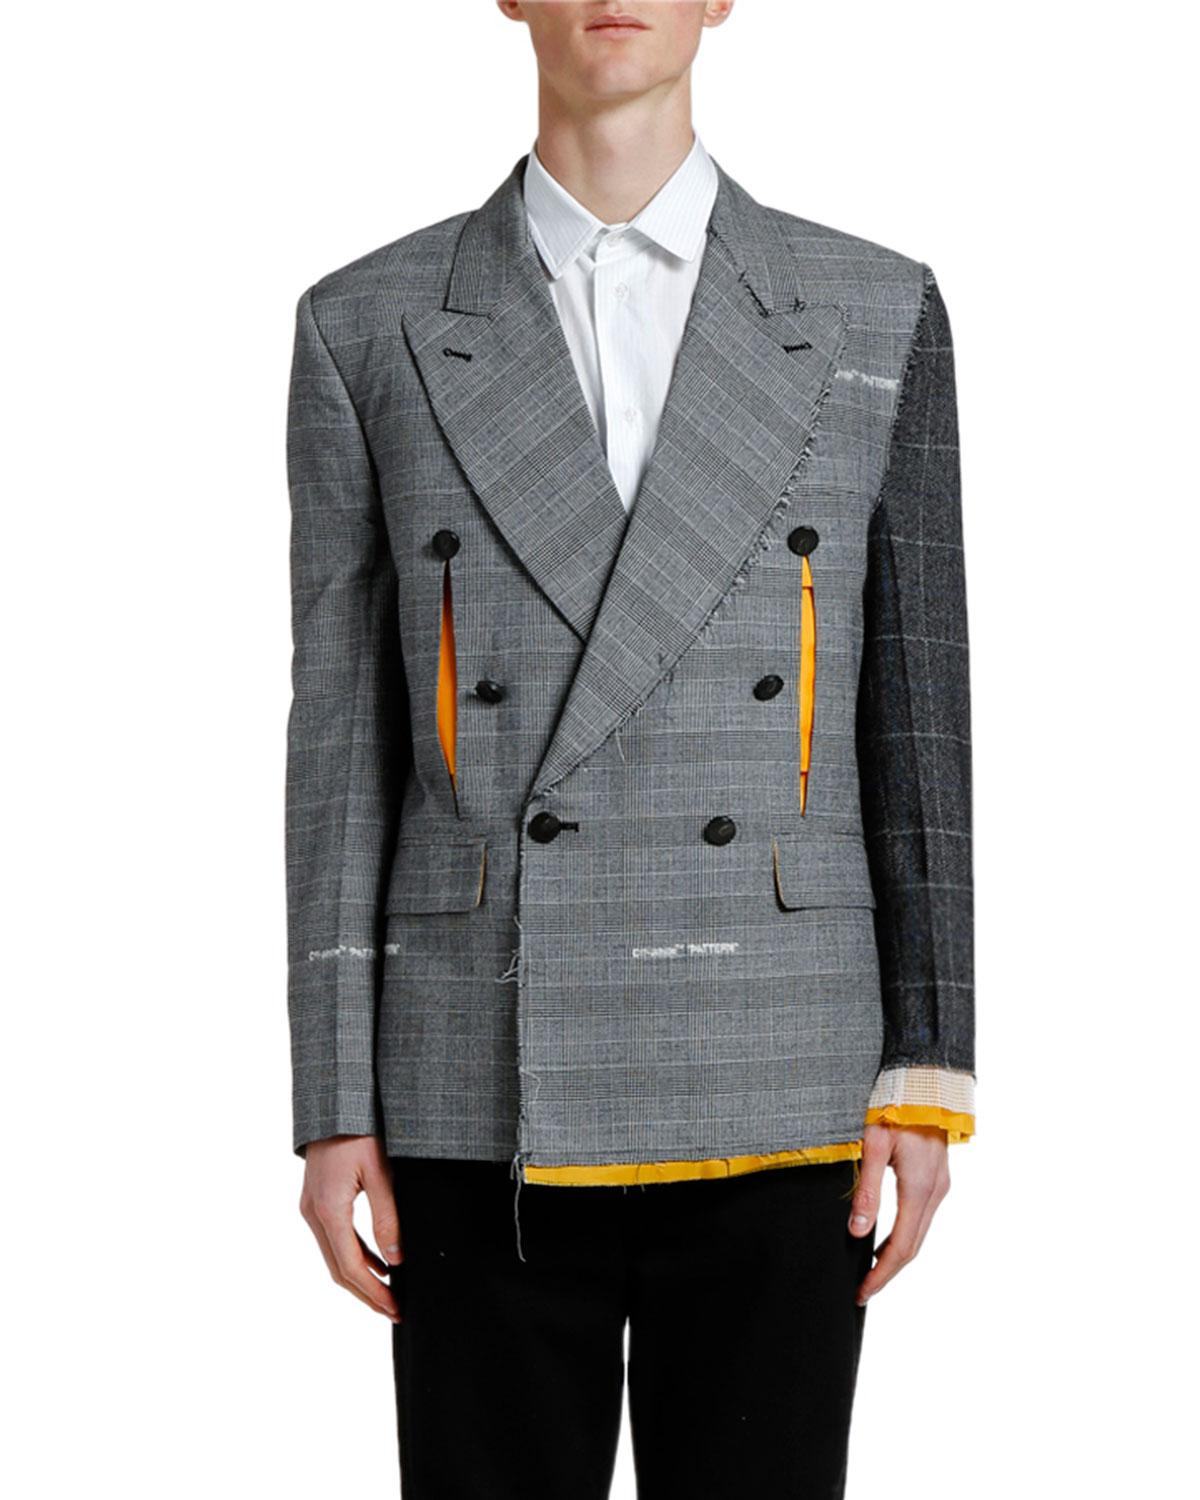 Off-White c/o Virgil Abloh Cotton Men's Reconstructed Double-breasted Jacket  in Gray for Men - Lyst